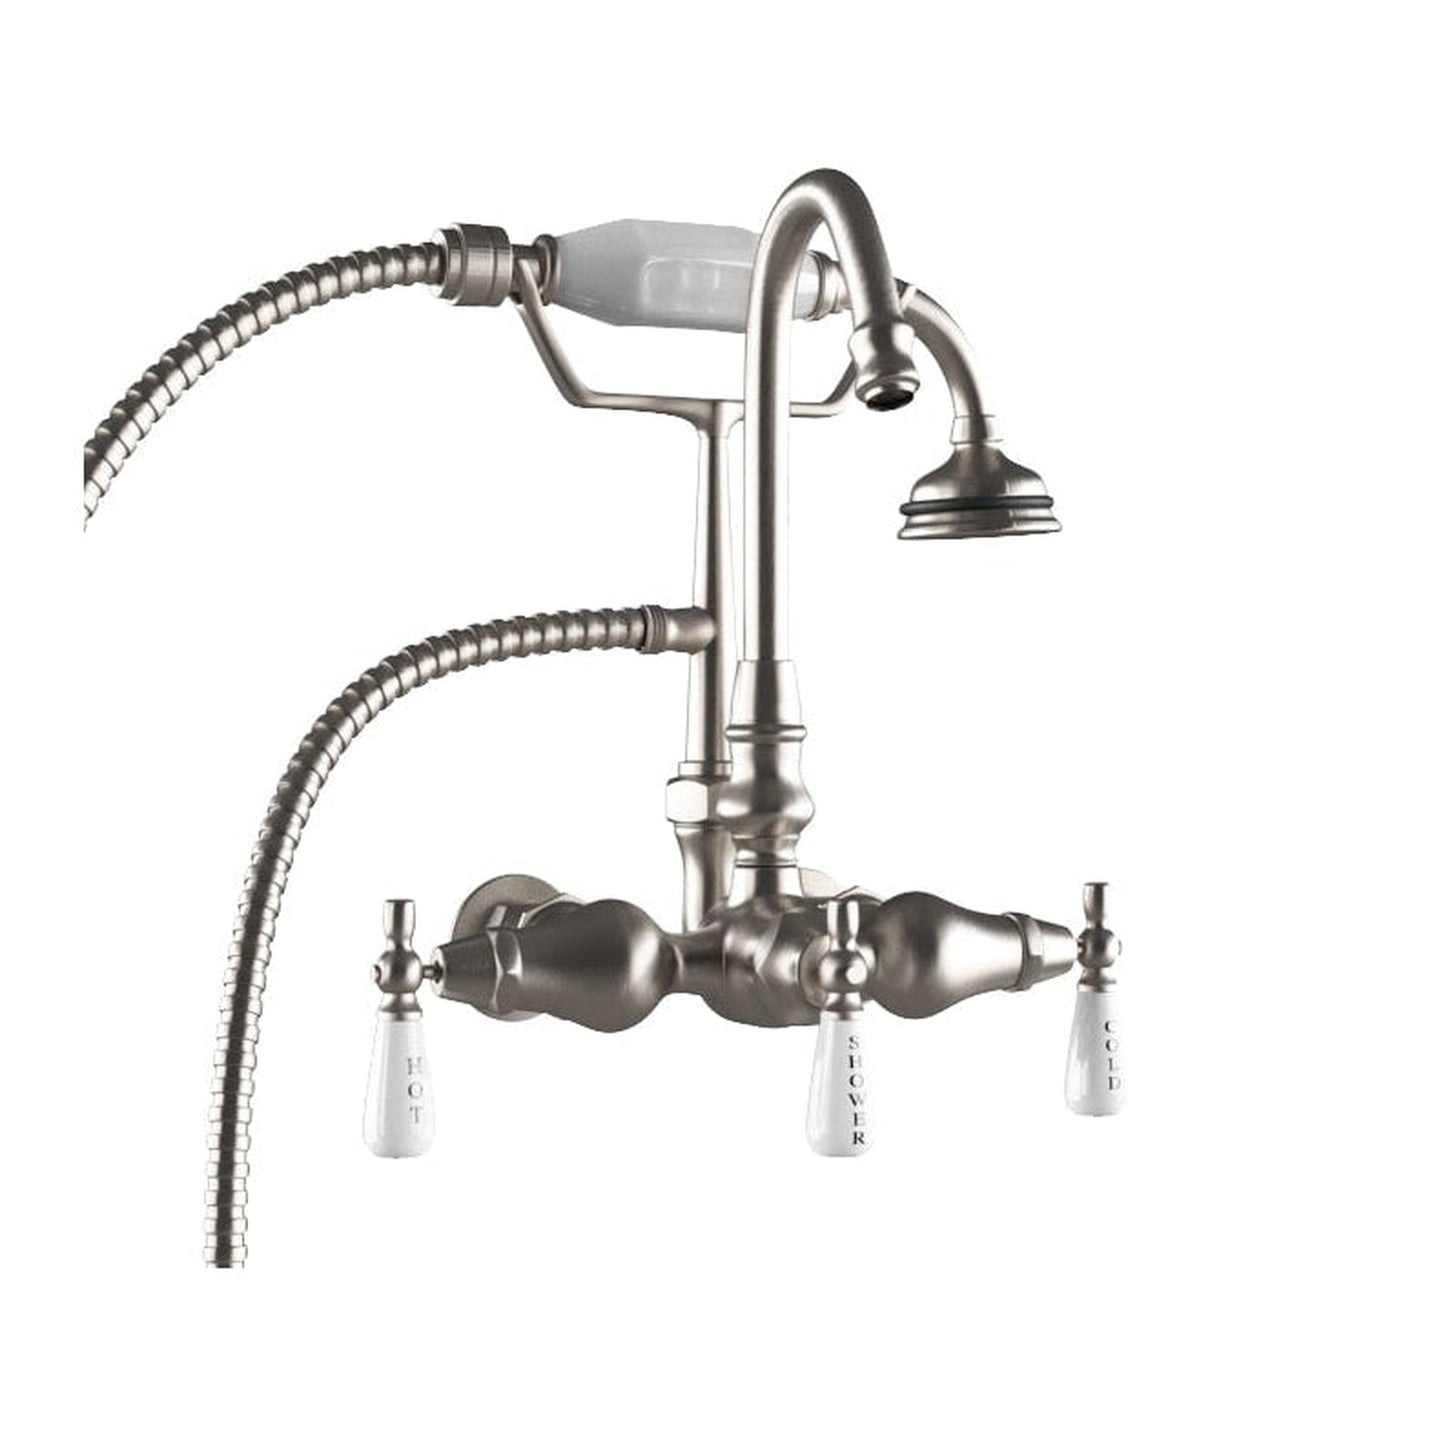 Cambridge Plumbing Brushed Nickel Clawfoot Tub Wall Mount British Telephonic Porcelain Handles Faucet With Hand Held Shower